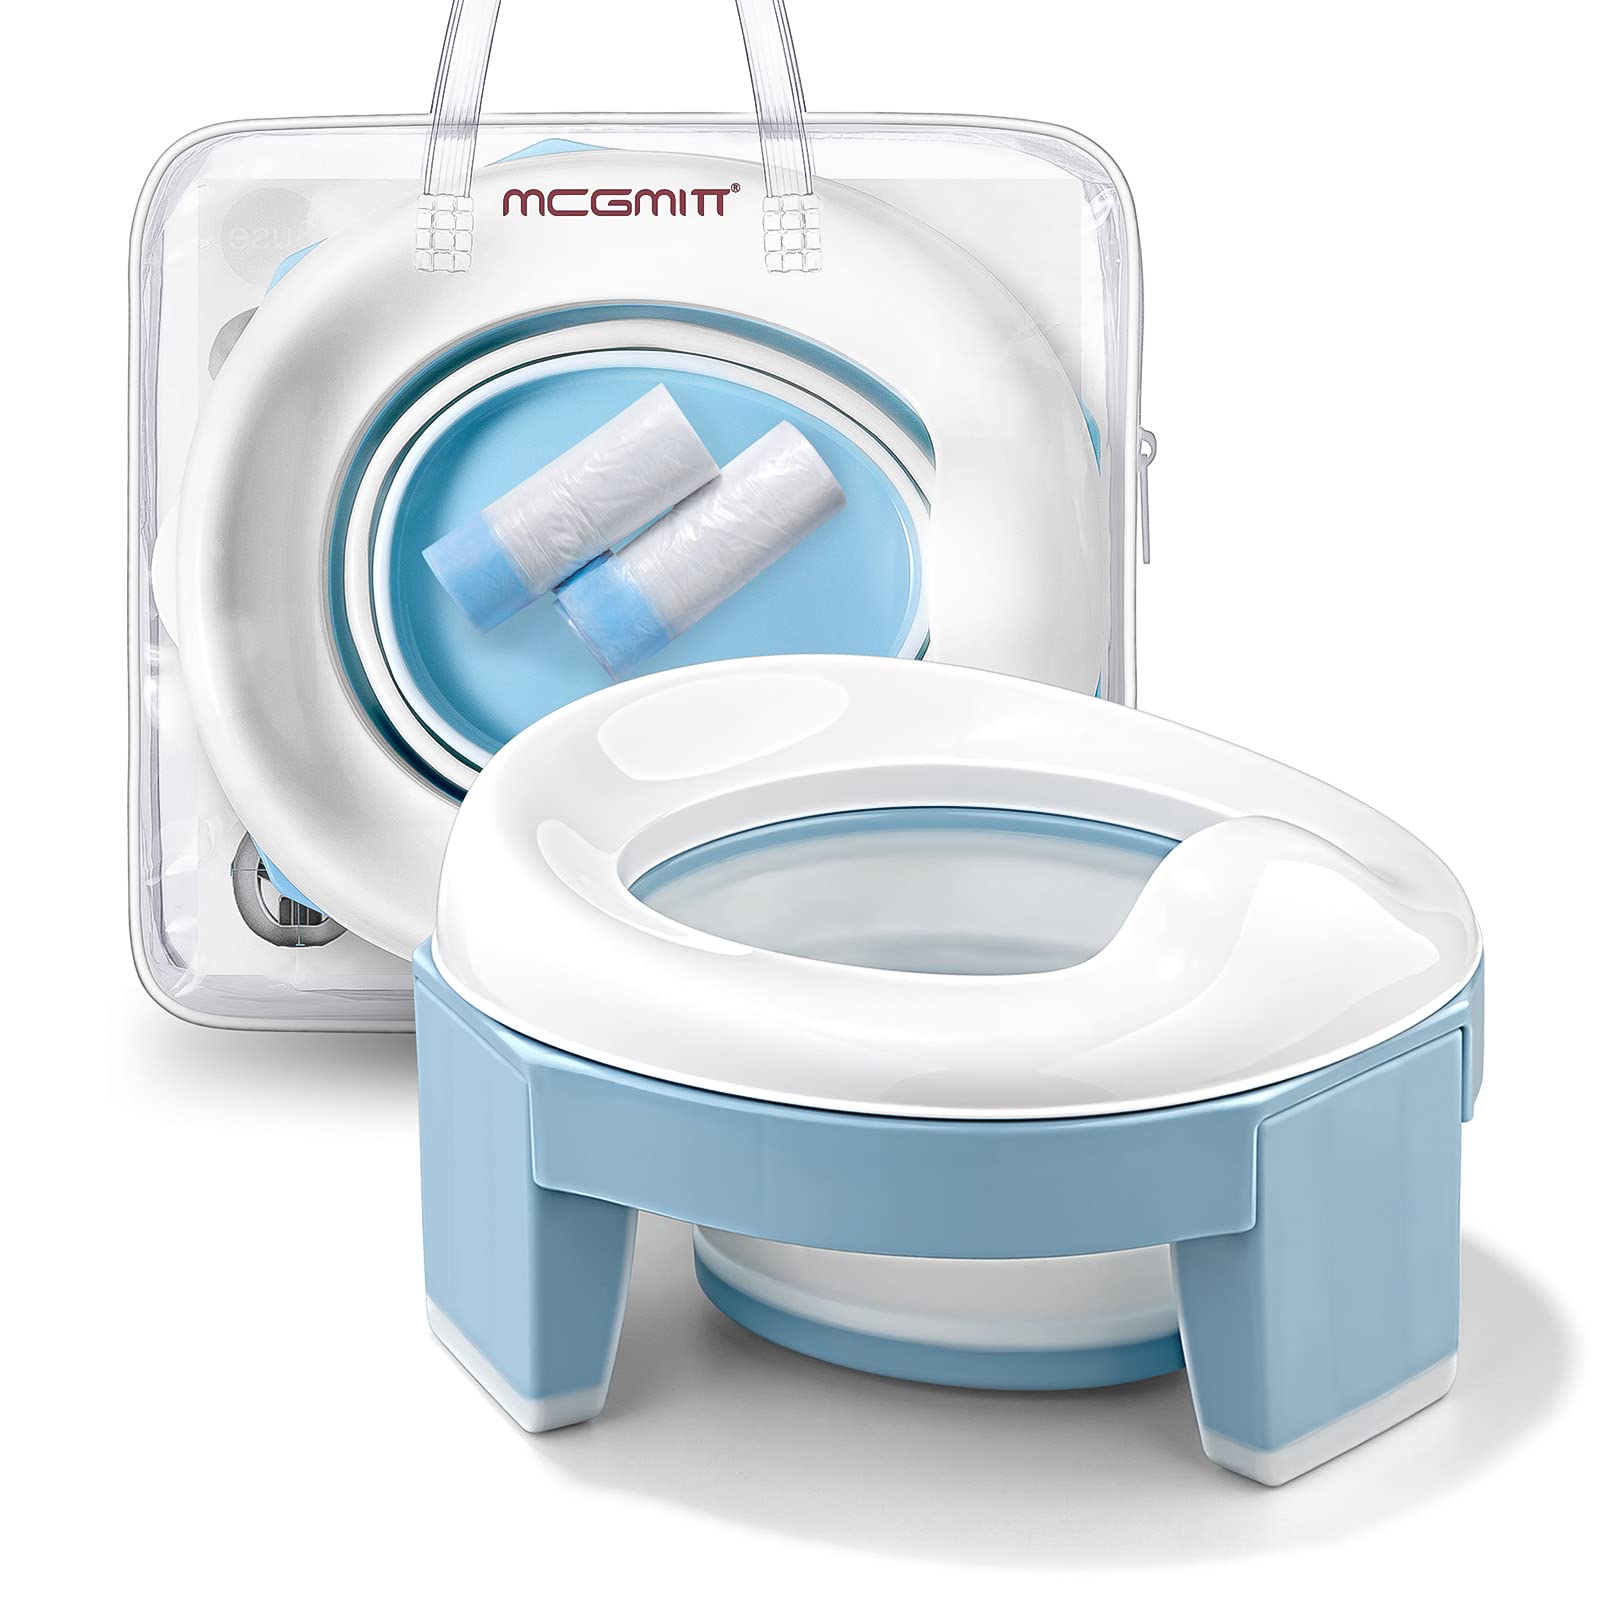 toilet training baby seat Toddler travel potty seat 2 in 1 portable toilet seat kids convenient